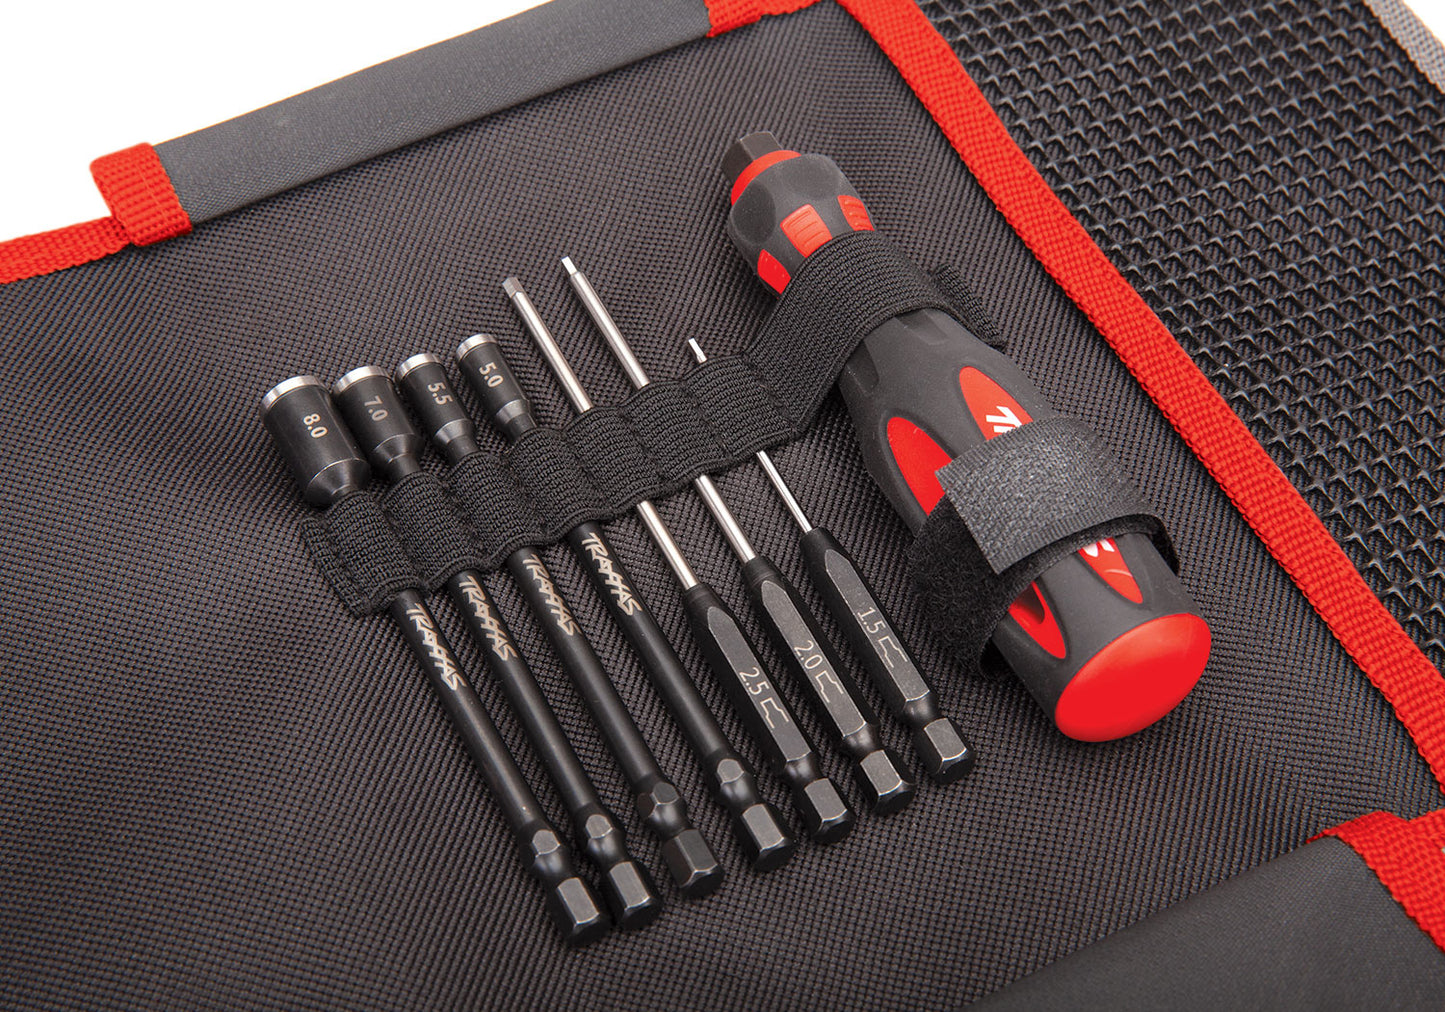 8712 7-Piece Metric Hex and Nut Driver Essentials Set